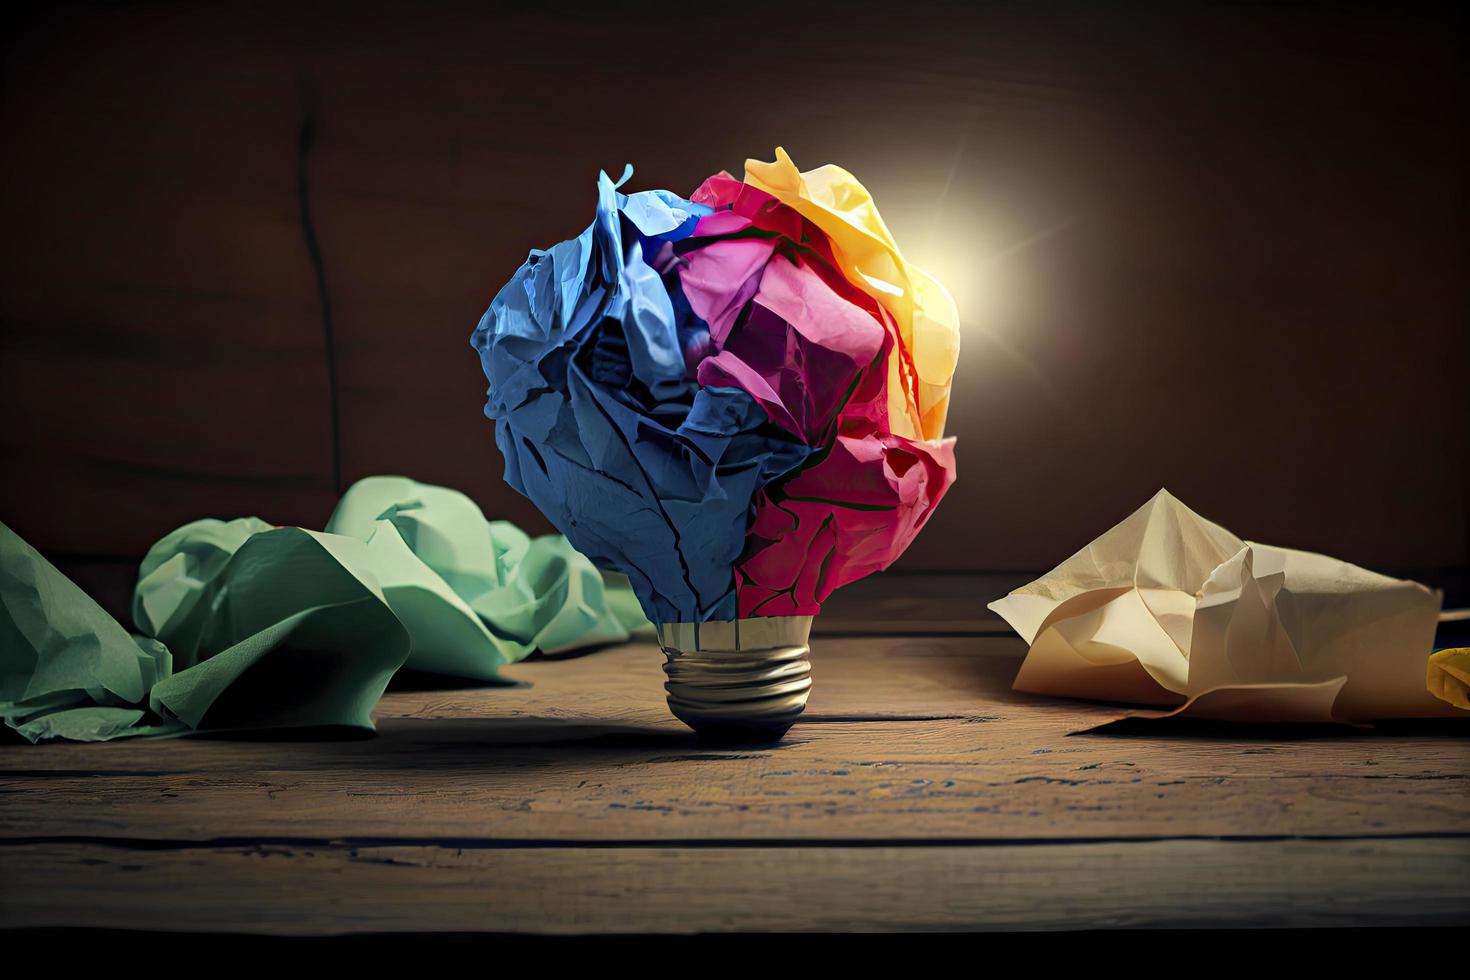 great idea concept with crumpled colorful paper and light bulb on wooden table photo